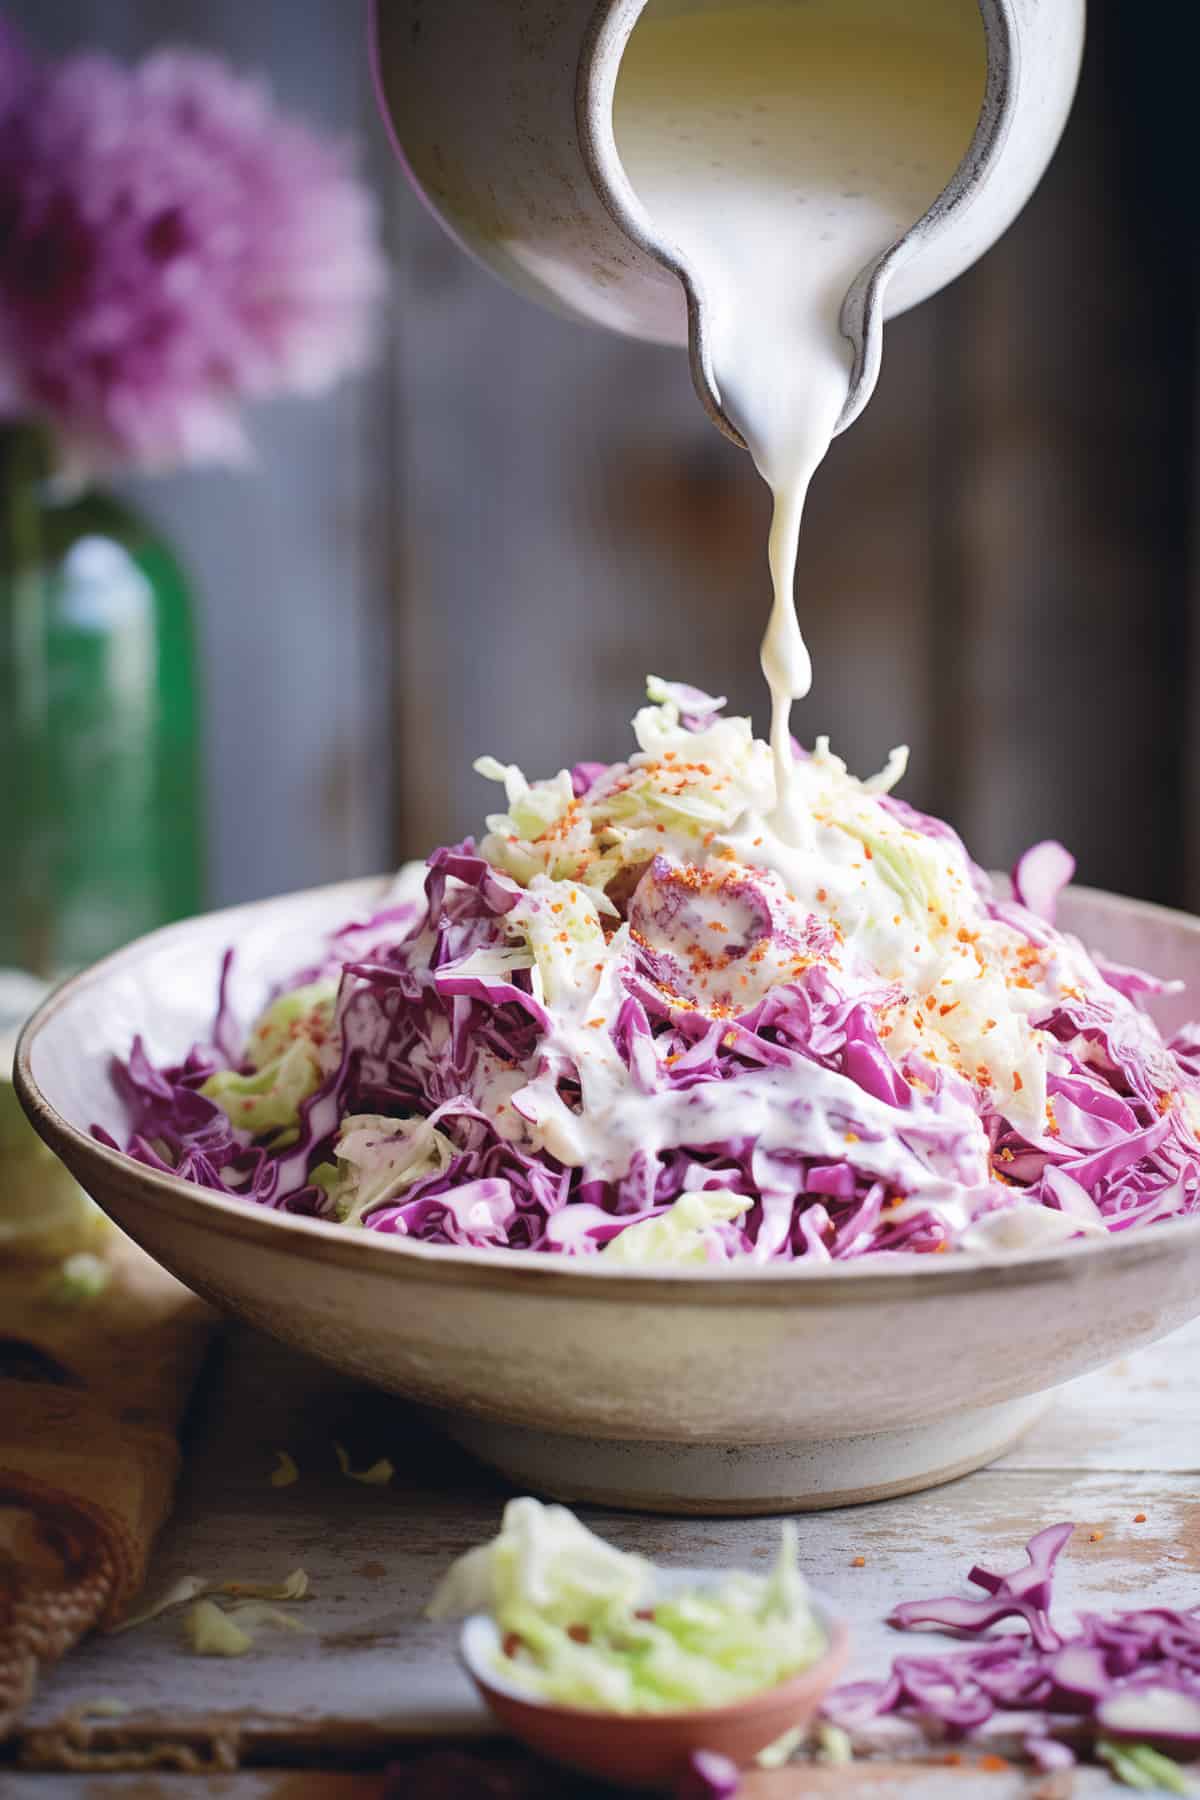 Coleslaw being drizzled with dressing.